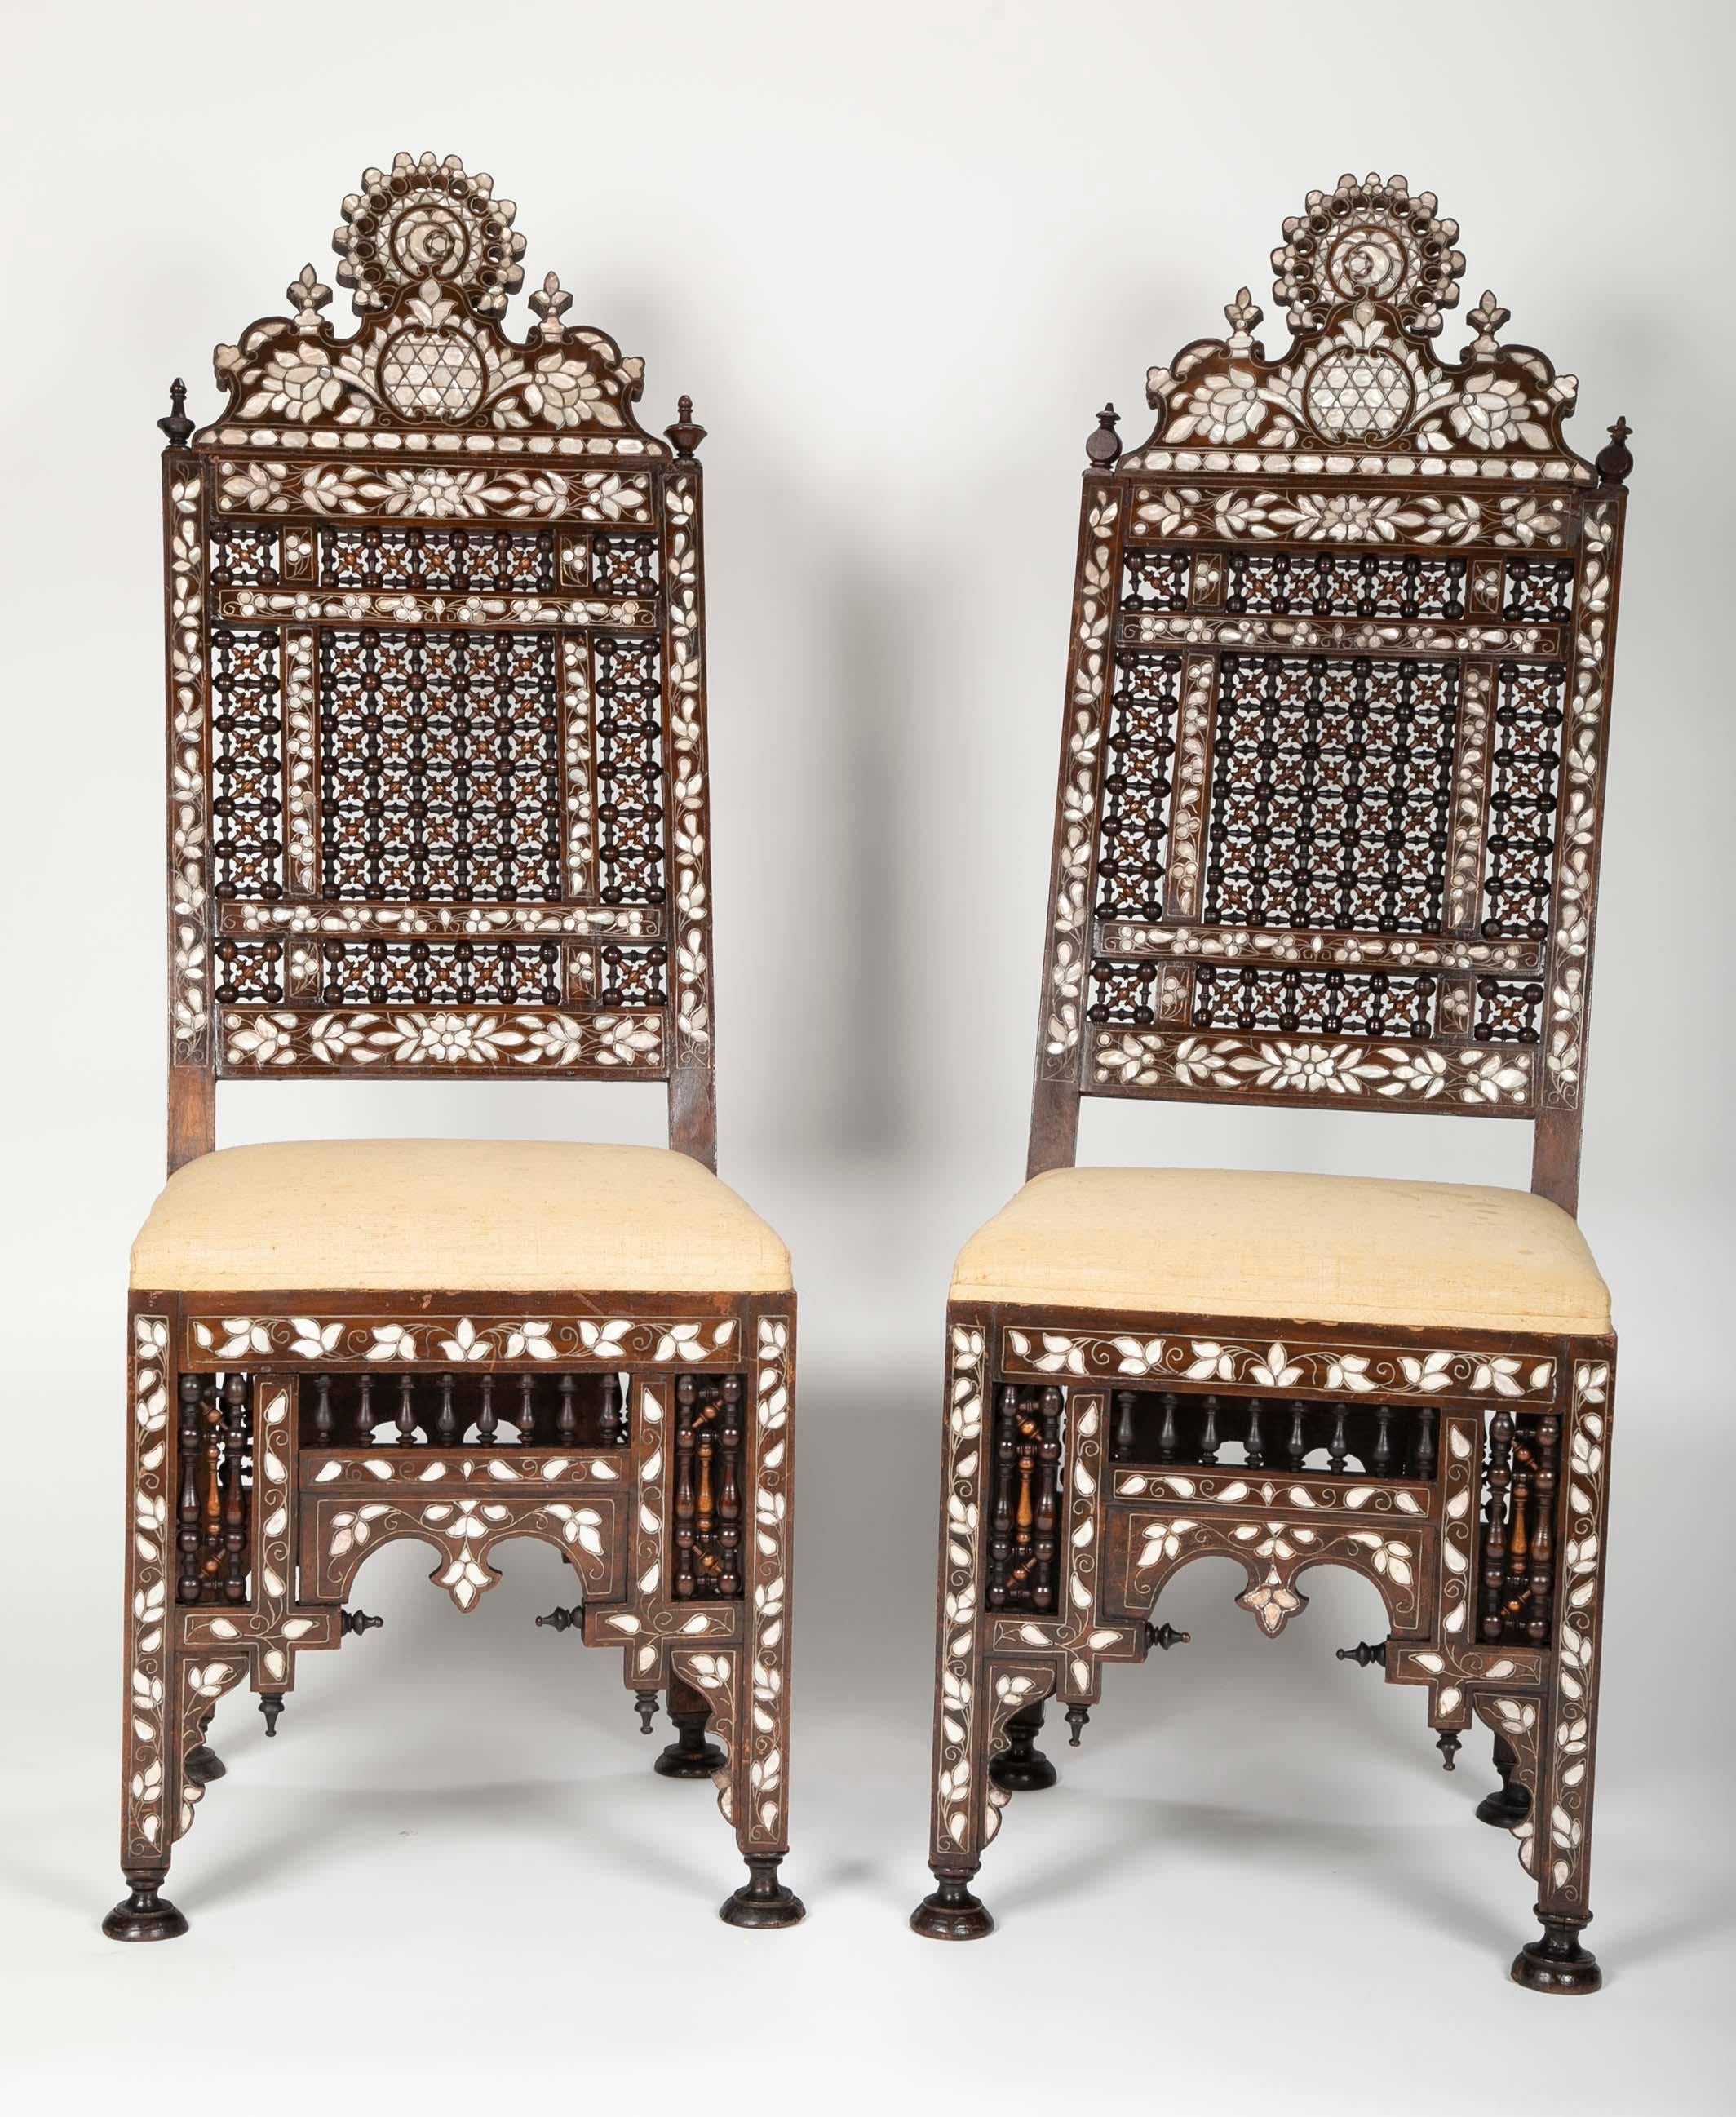 Impressive pair of mother-of-pearl and metal inlaid chairs with intricate hardwood turnings. The skill and time that went into creating these chairs is remarkable. Each with a crest holding the 'star and crescent',
symbol of the Ottoman Empire.